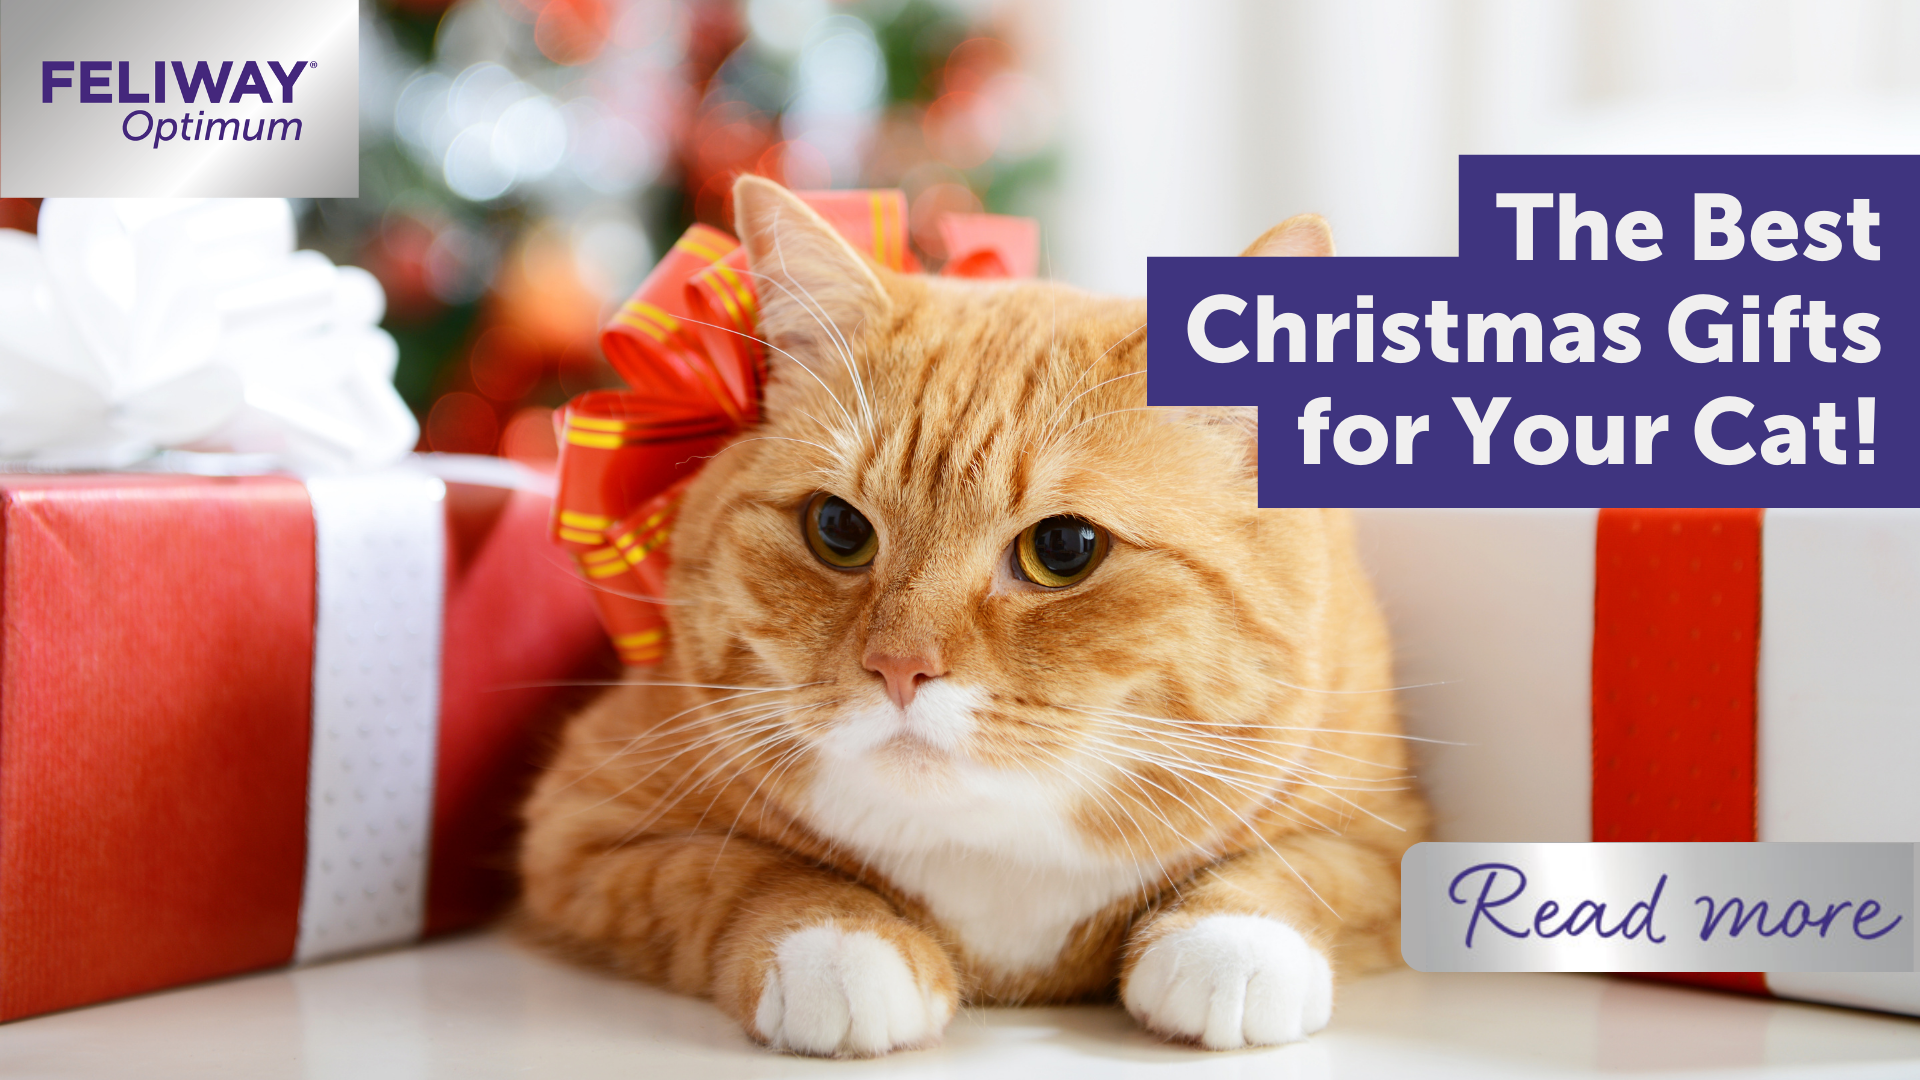 The Best Christmas Gifts for Your Cat!